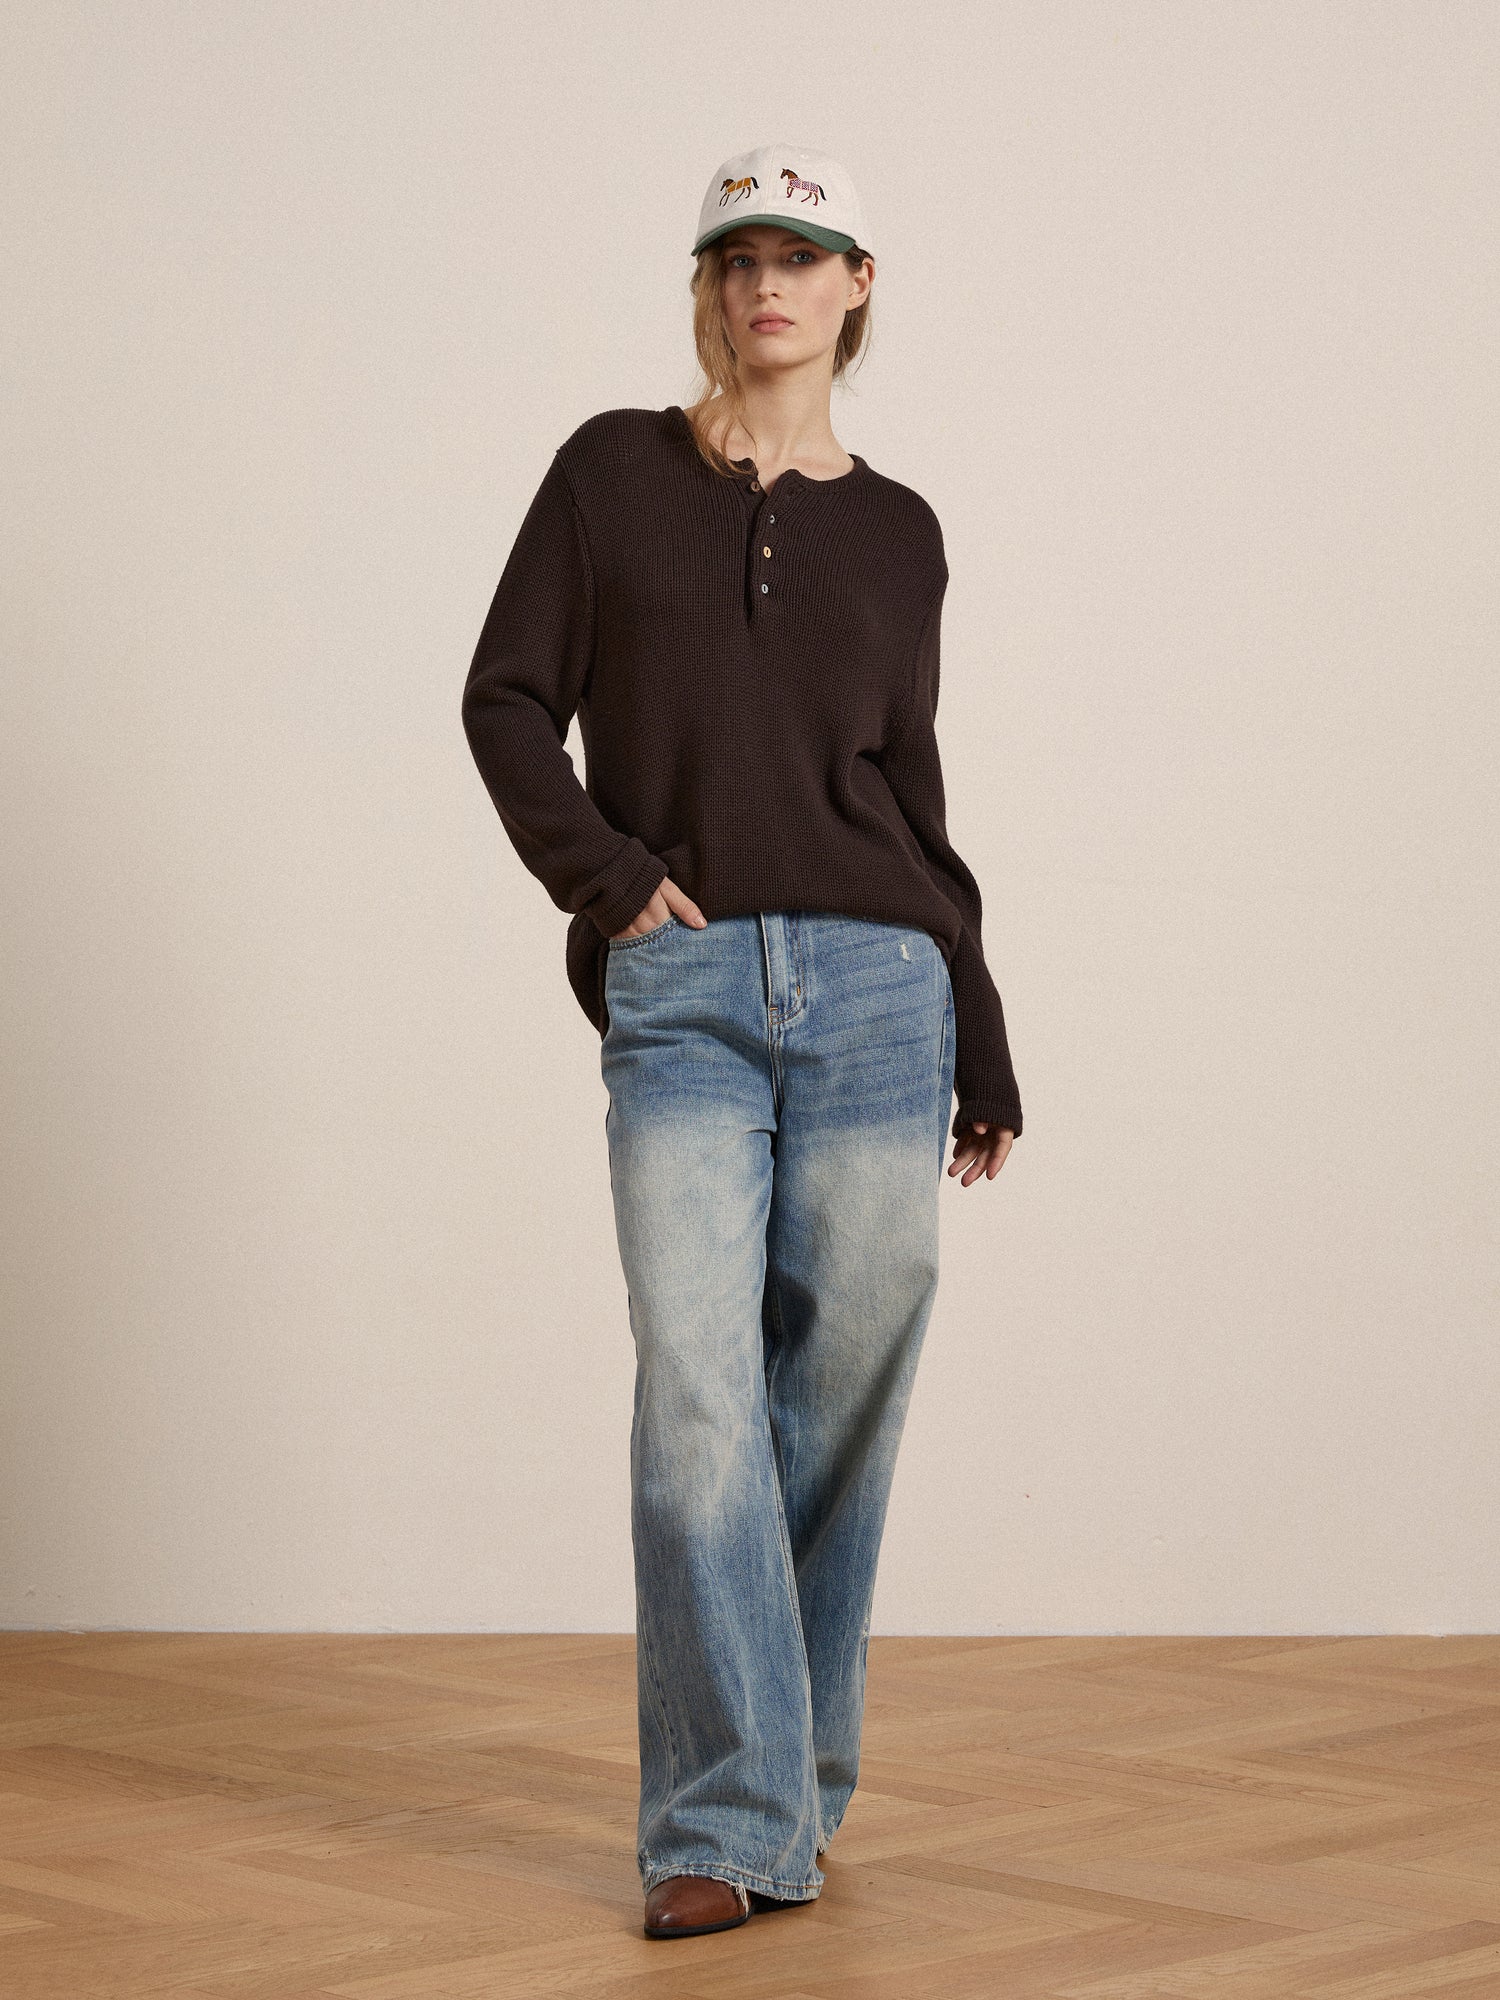 The model is wearing a brown Profound knit Henley sweater with a button-up design and jeans.